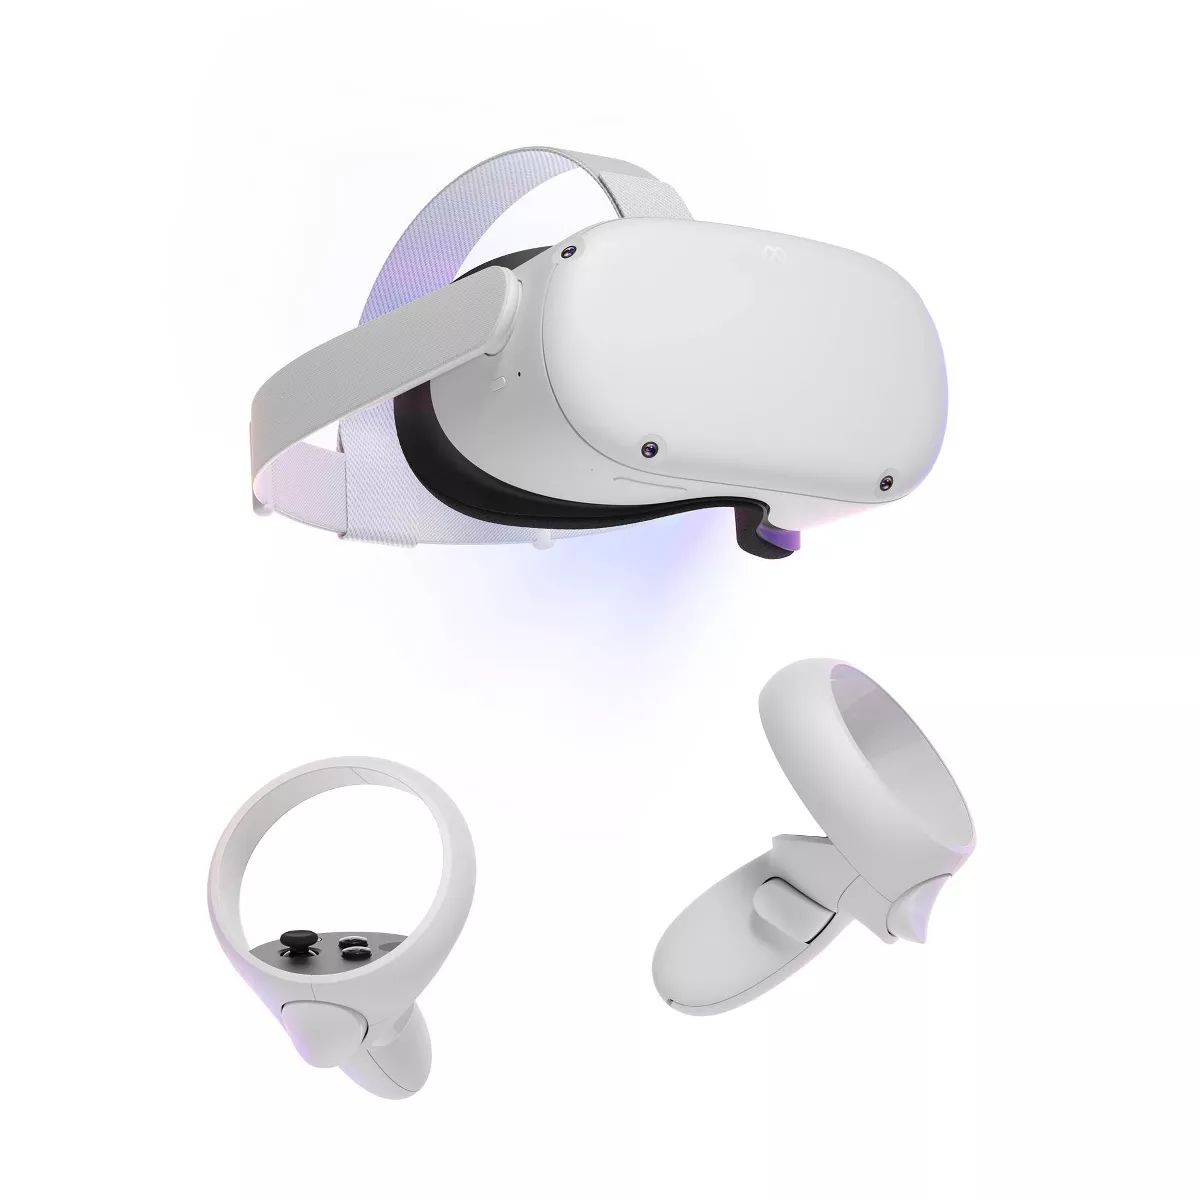 Meta Quest 2: Advanced All-In-One Virtual Reality Headset - 256GB | Target